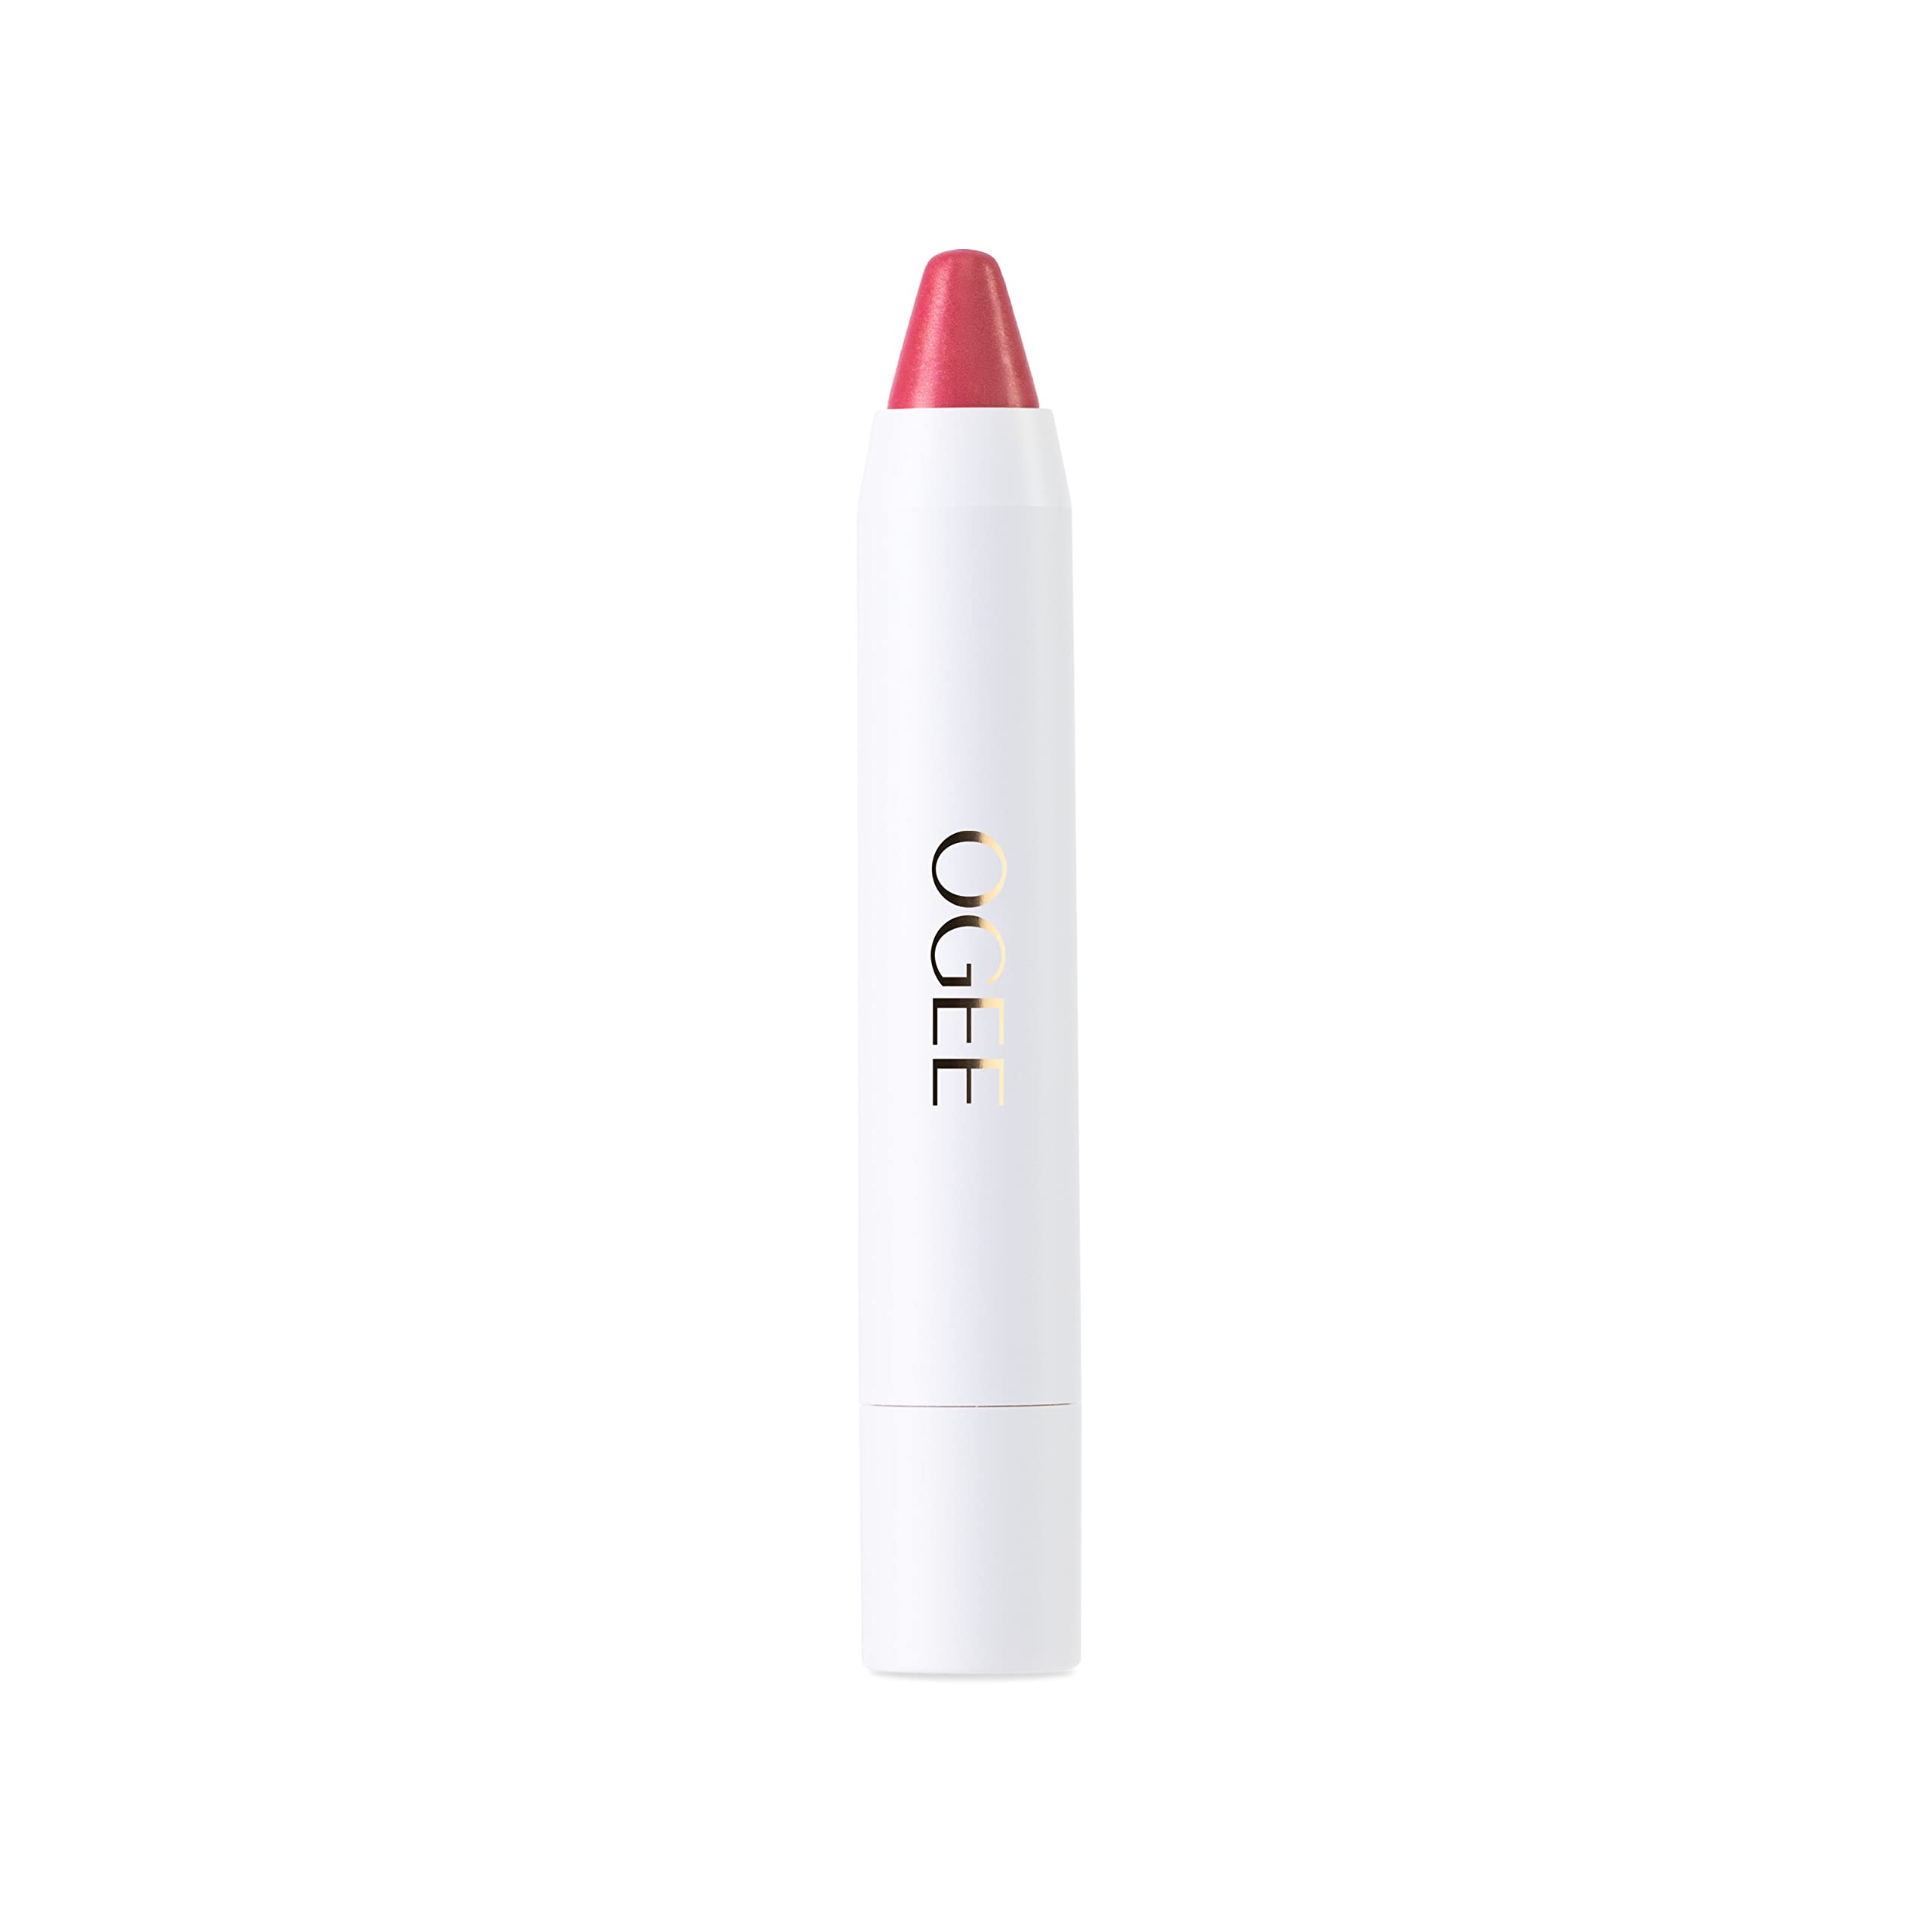 Book Cover Ogee Tinted Sculpted Lip Oil - Made with 100% Organic Coconut Oil, Jojoba Oil, and Vitamin E - Best as Lip Balm, Lip Color or Lip Treatment - CAMELLIA Camellia - Classic Pink